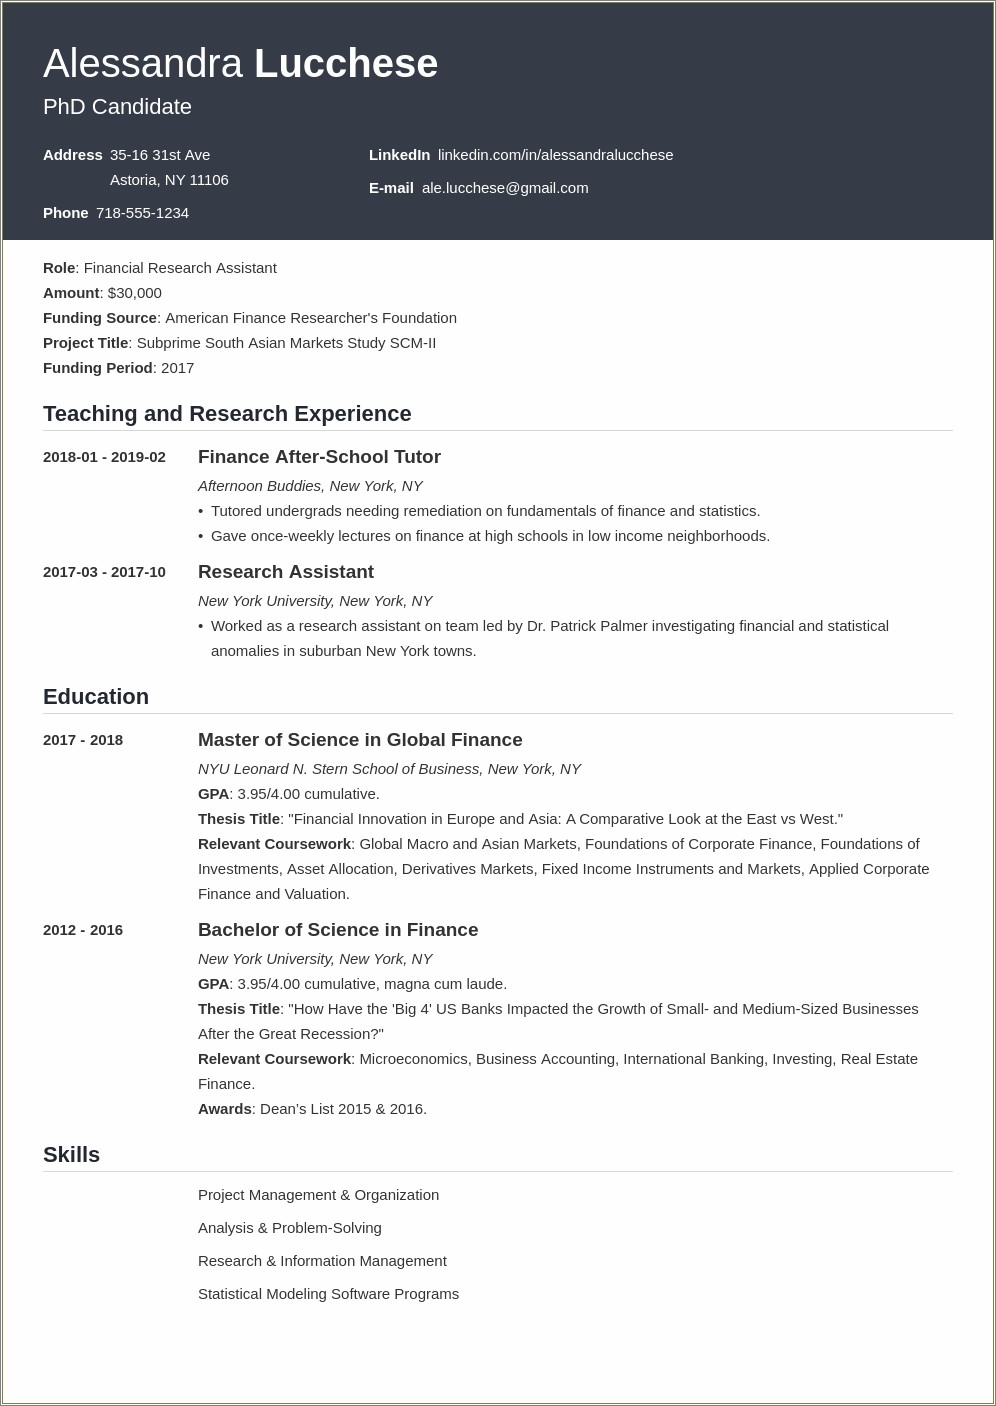 List Of Items For Resume For Graduate School